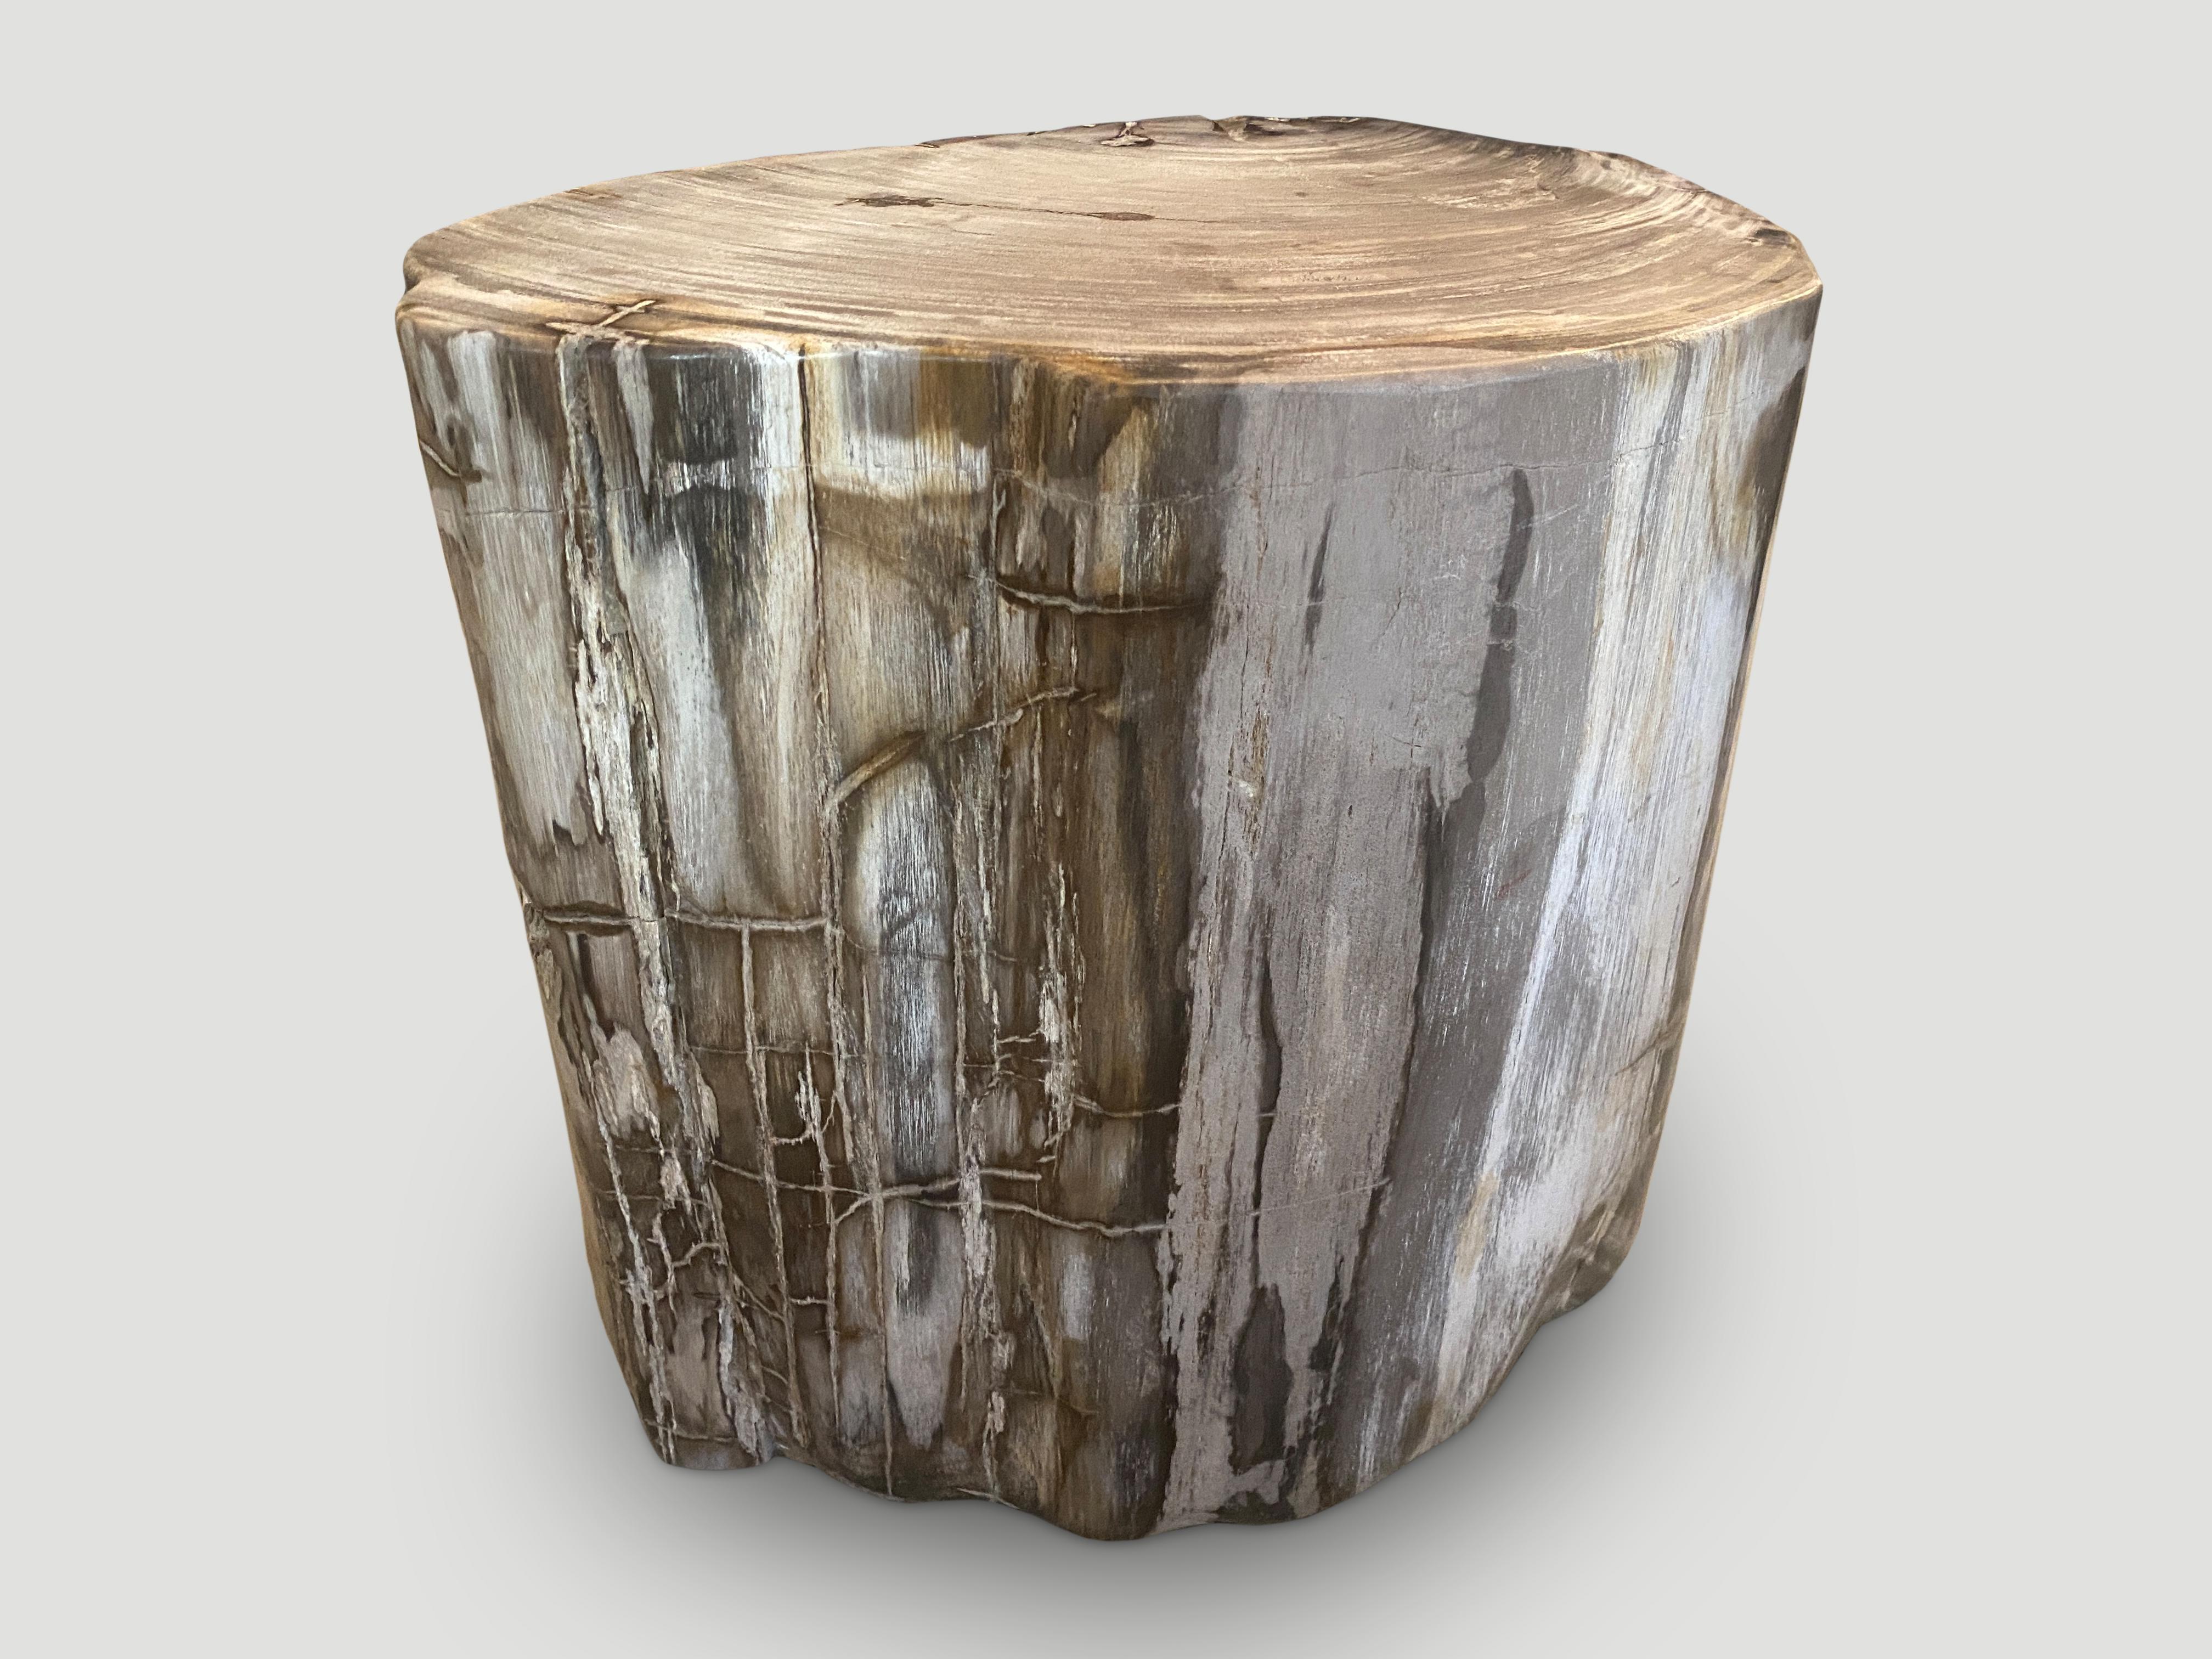 Beautiful contrasting tones and textures on this ancient petrified wood side table. Rare. It’s fascinating how Mother Nature produces these exquisite 40 million year old petrified teak logs with such contrasting colors and natural patterns